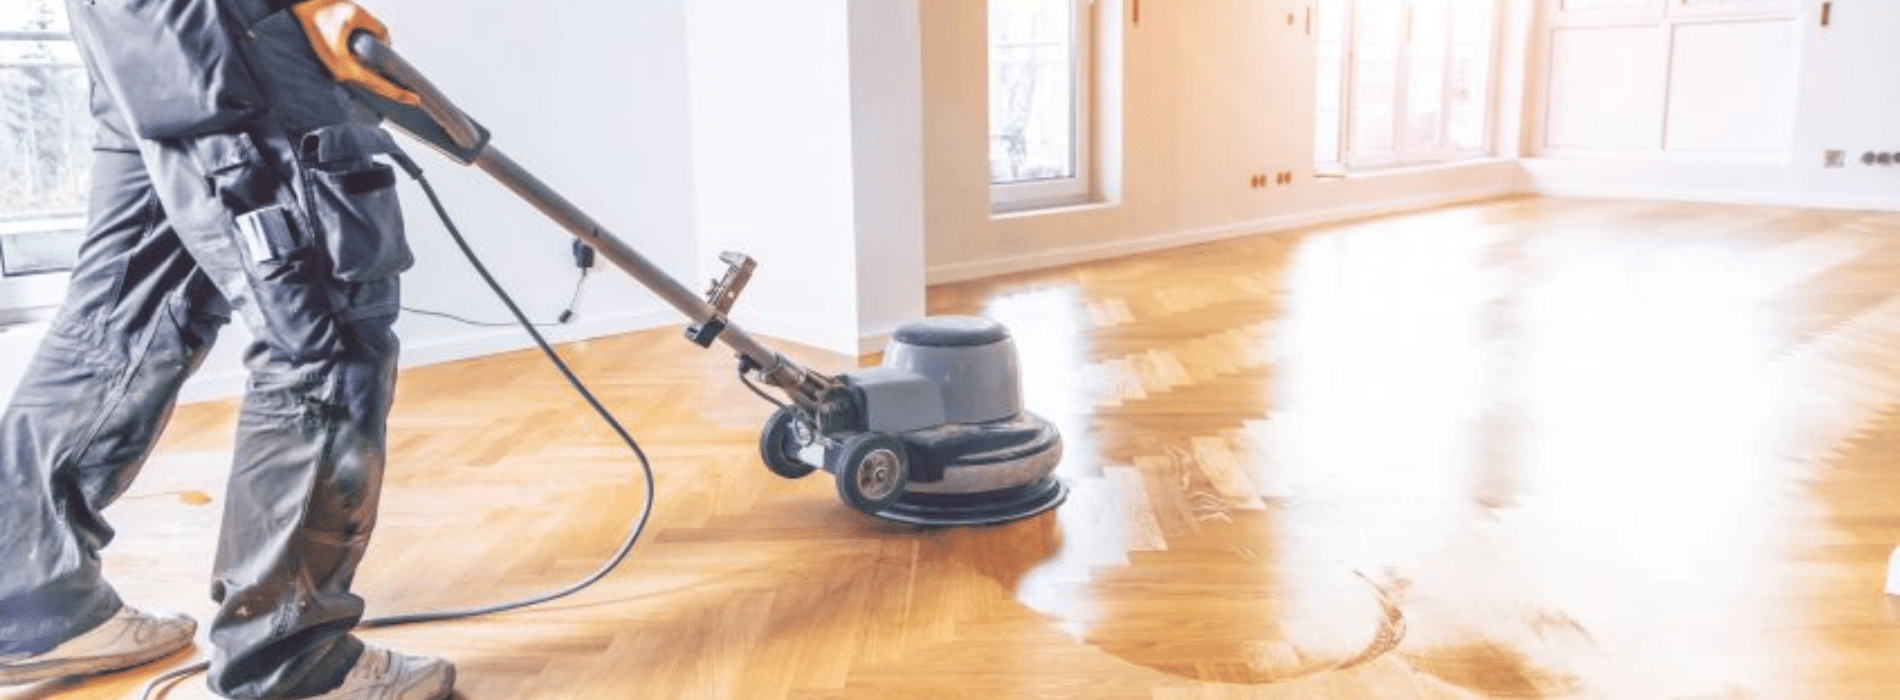 In Balham, SW12, Mr Sander® are using a Bona FlexiSand 1.5, a powerful floor buffer sander with a Ø 407 mm dimension and 1.5 kW effect. Operating at 230V and 50 Hz/60 Hz, it's connected to a dust extraction system equipped with a HEPA filter for optimal cleanliness and efficiency during the sanding of a herringbone floor.